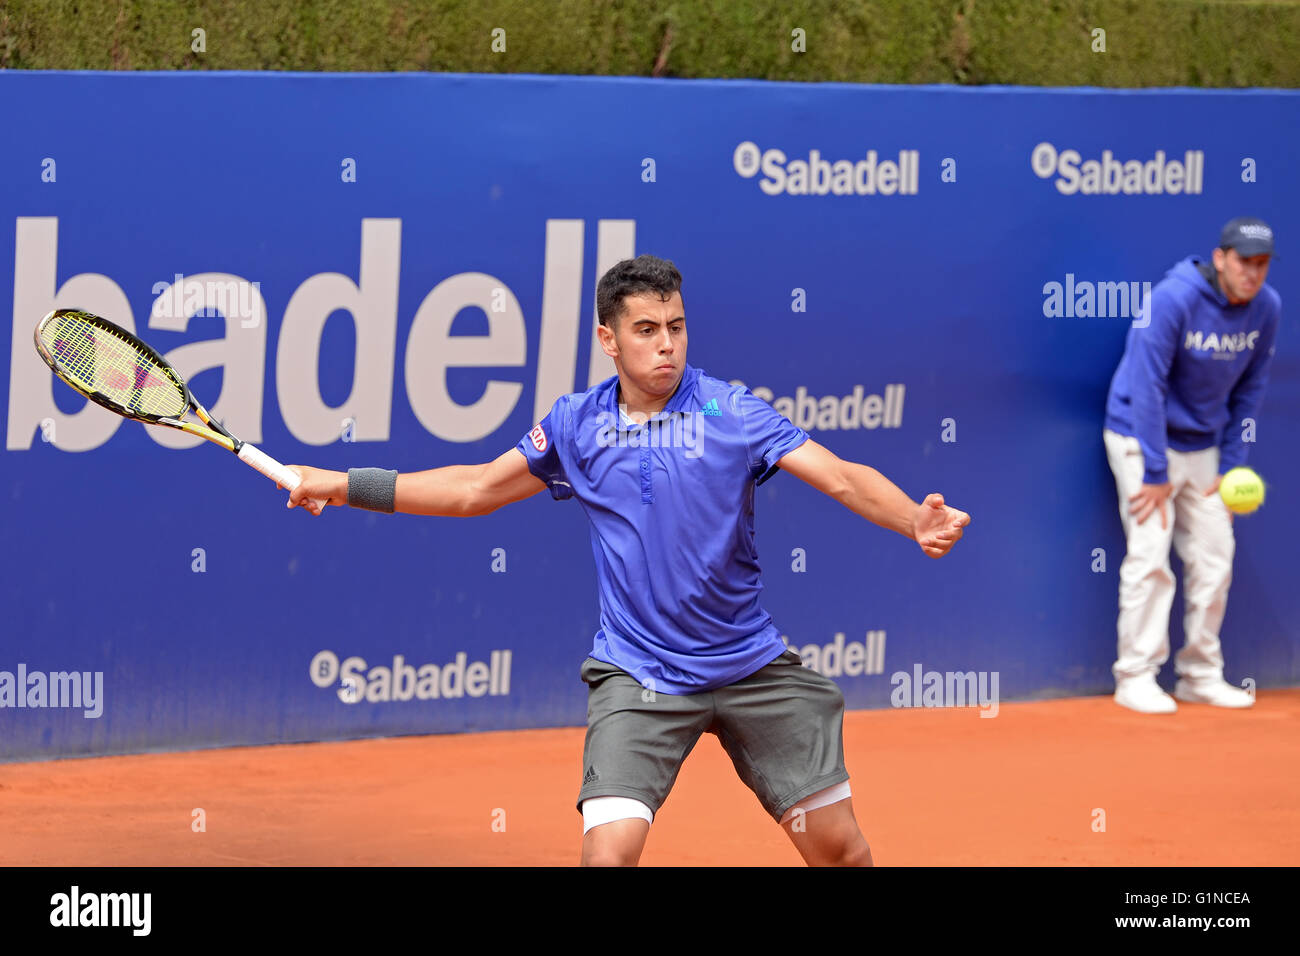 BARCELONA - APR 20: Jaume Munar (Spanish tennis player) plays at the ATP Barcelona Open. Stock Photo